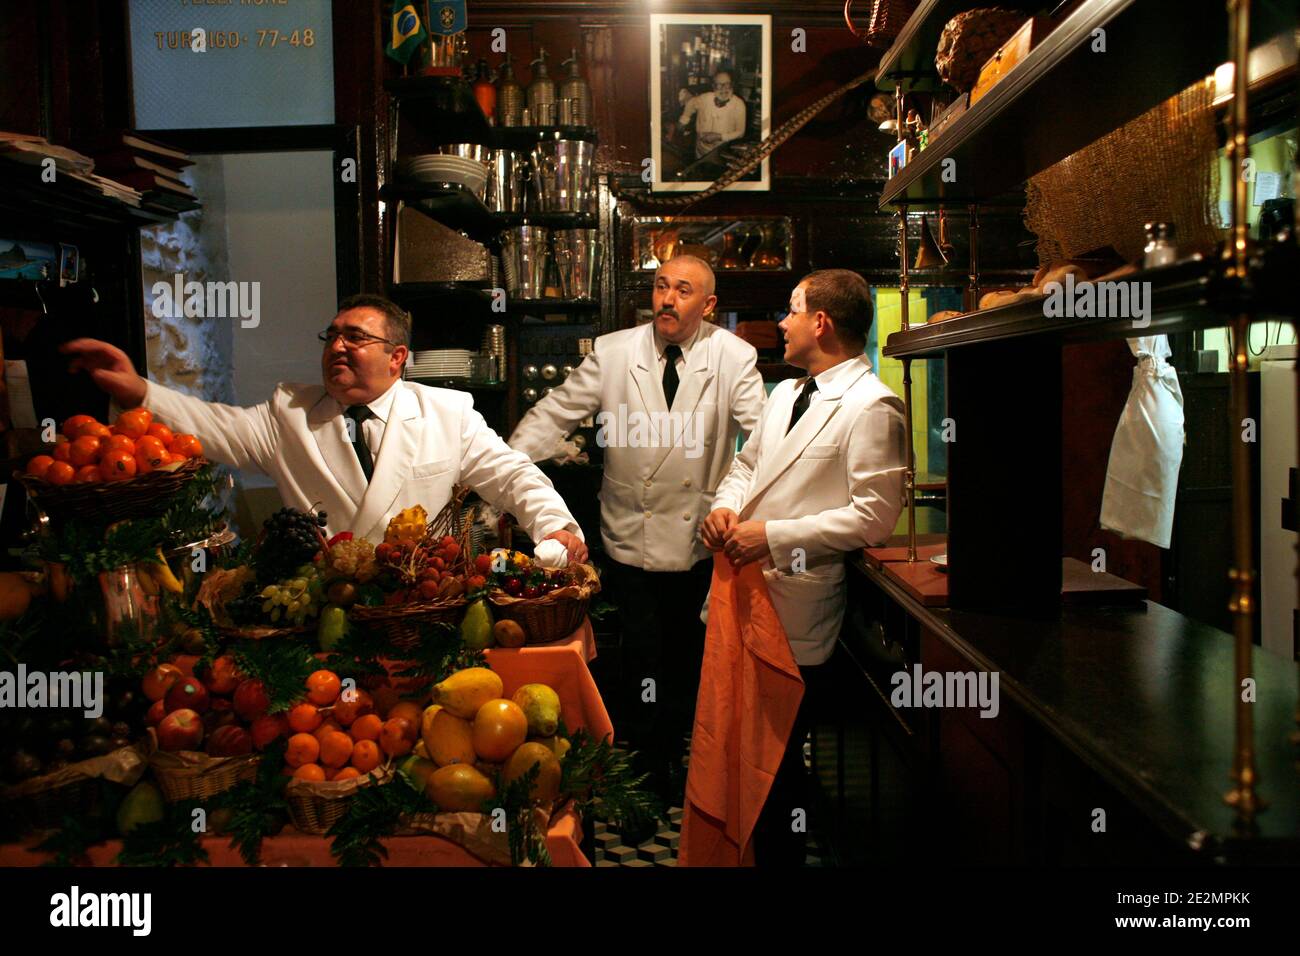 Louis Gadby, one of both owners, and his team pictured at L'Ami Louis restaurant in Paris, France December 11, 2009. Photo by Jean-Luc Luyssen/ABACAPRESS.COM Stock Photo